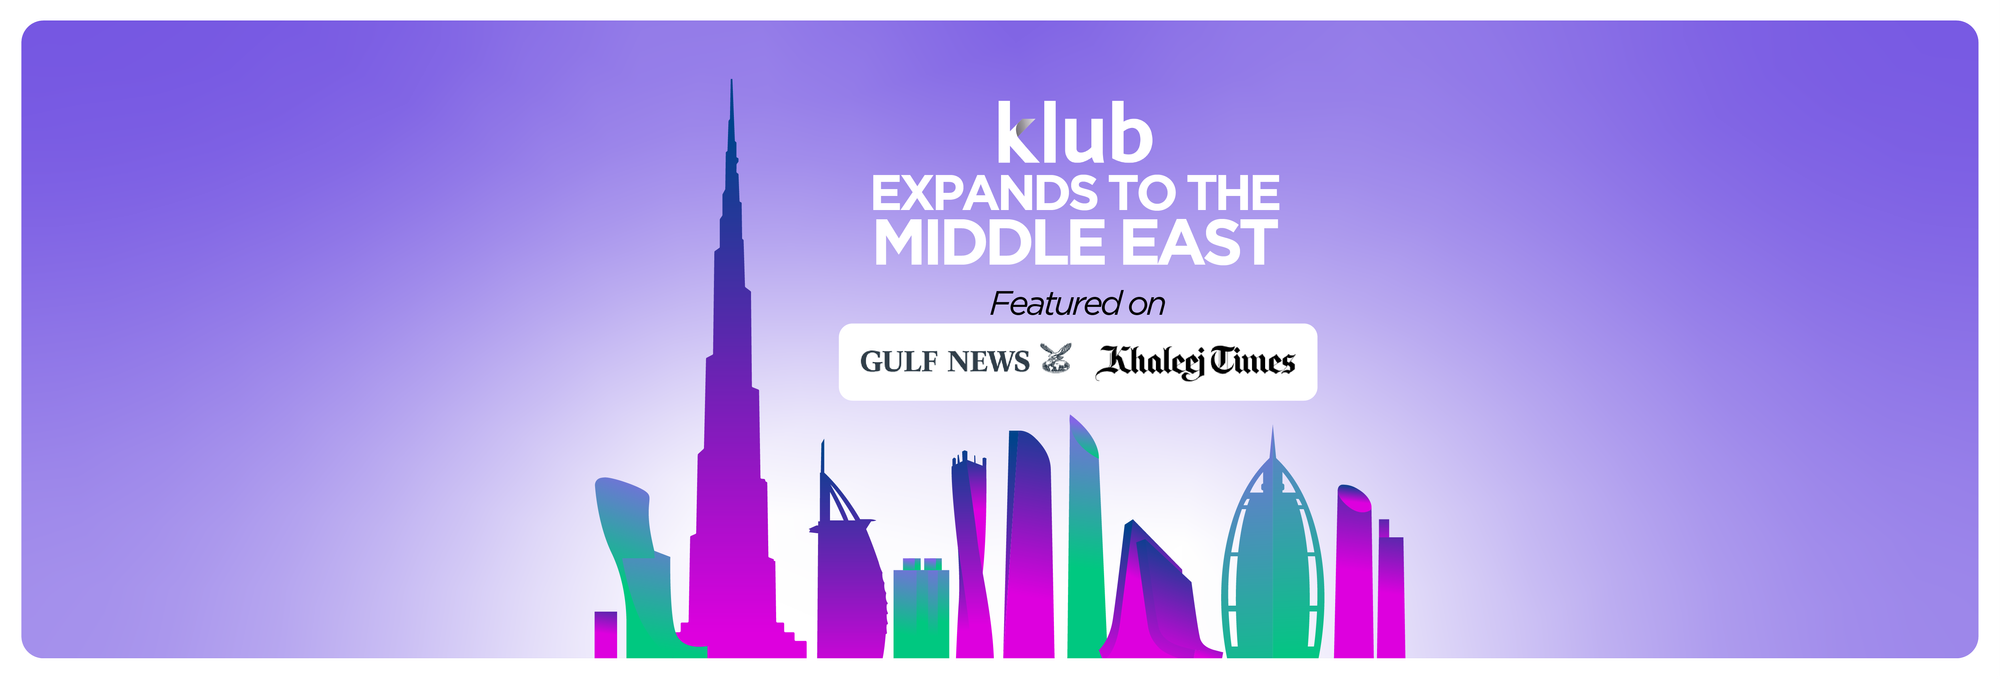 Revenue Based Financing leader Klub becomes the first to secure a credit fund licence; aims to invest AED 1 billion in the Middle East